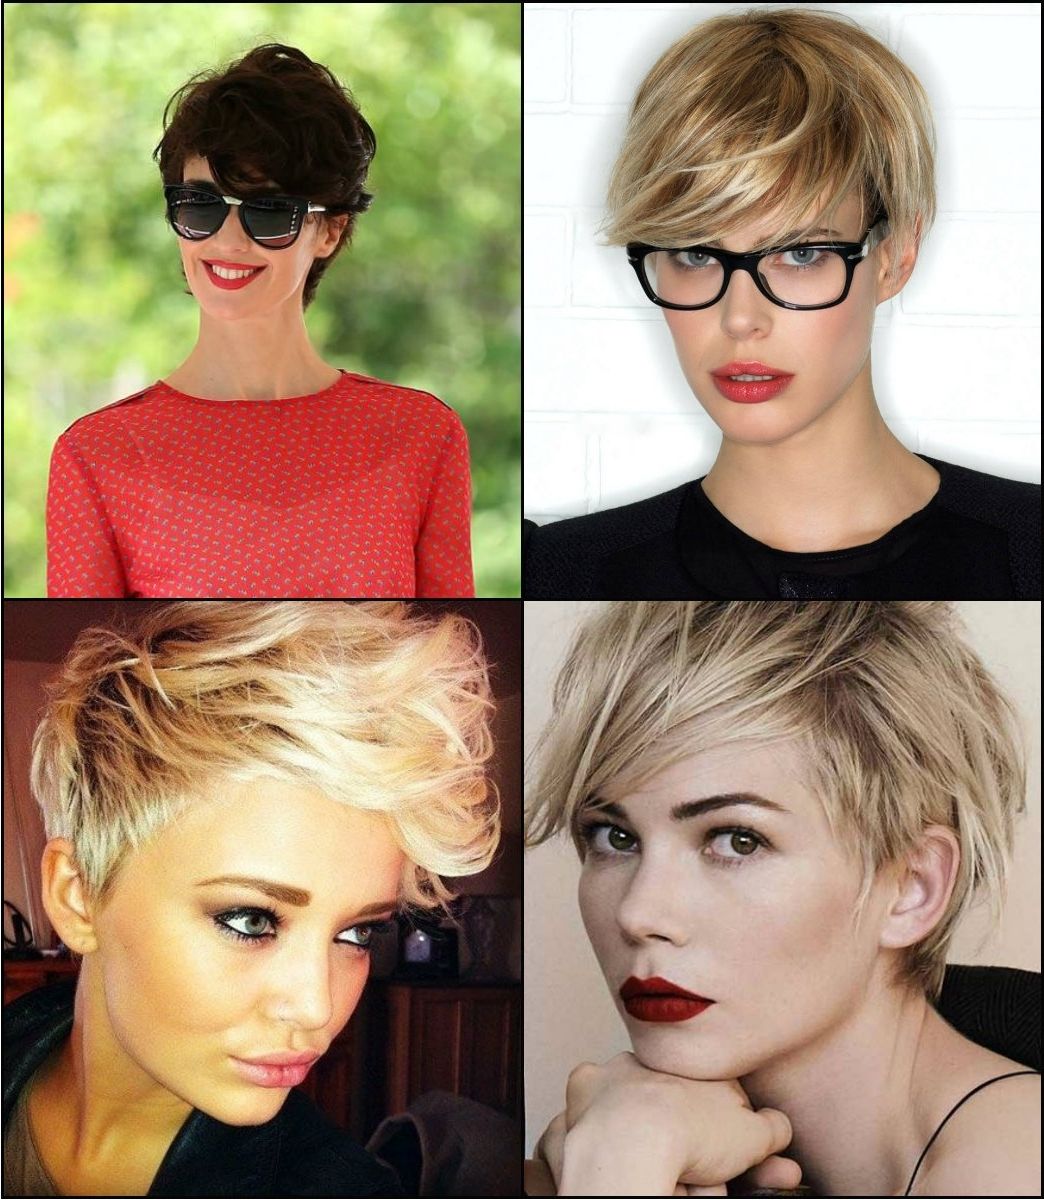 Long Pixie Haircuts You Have To Try In 2017 | Hairstyles 2017 In Most Popular Cute Long Pixie Hairstyles (View 14 of 15)